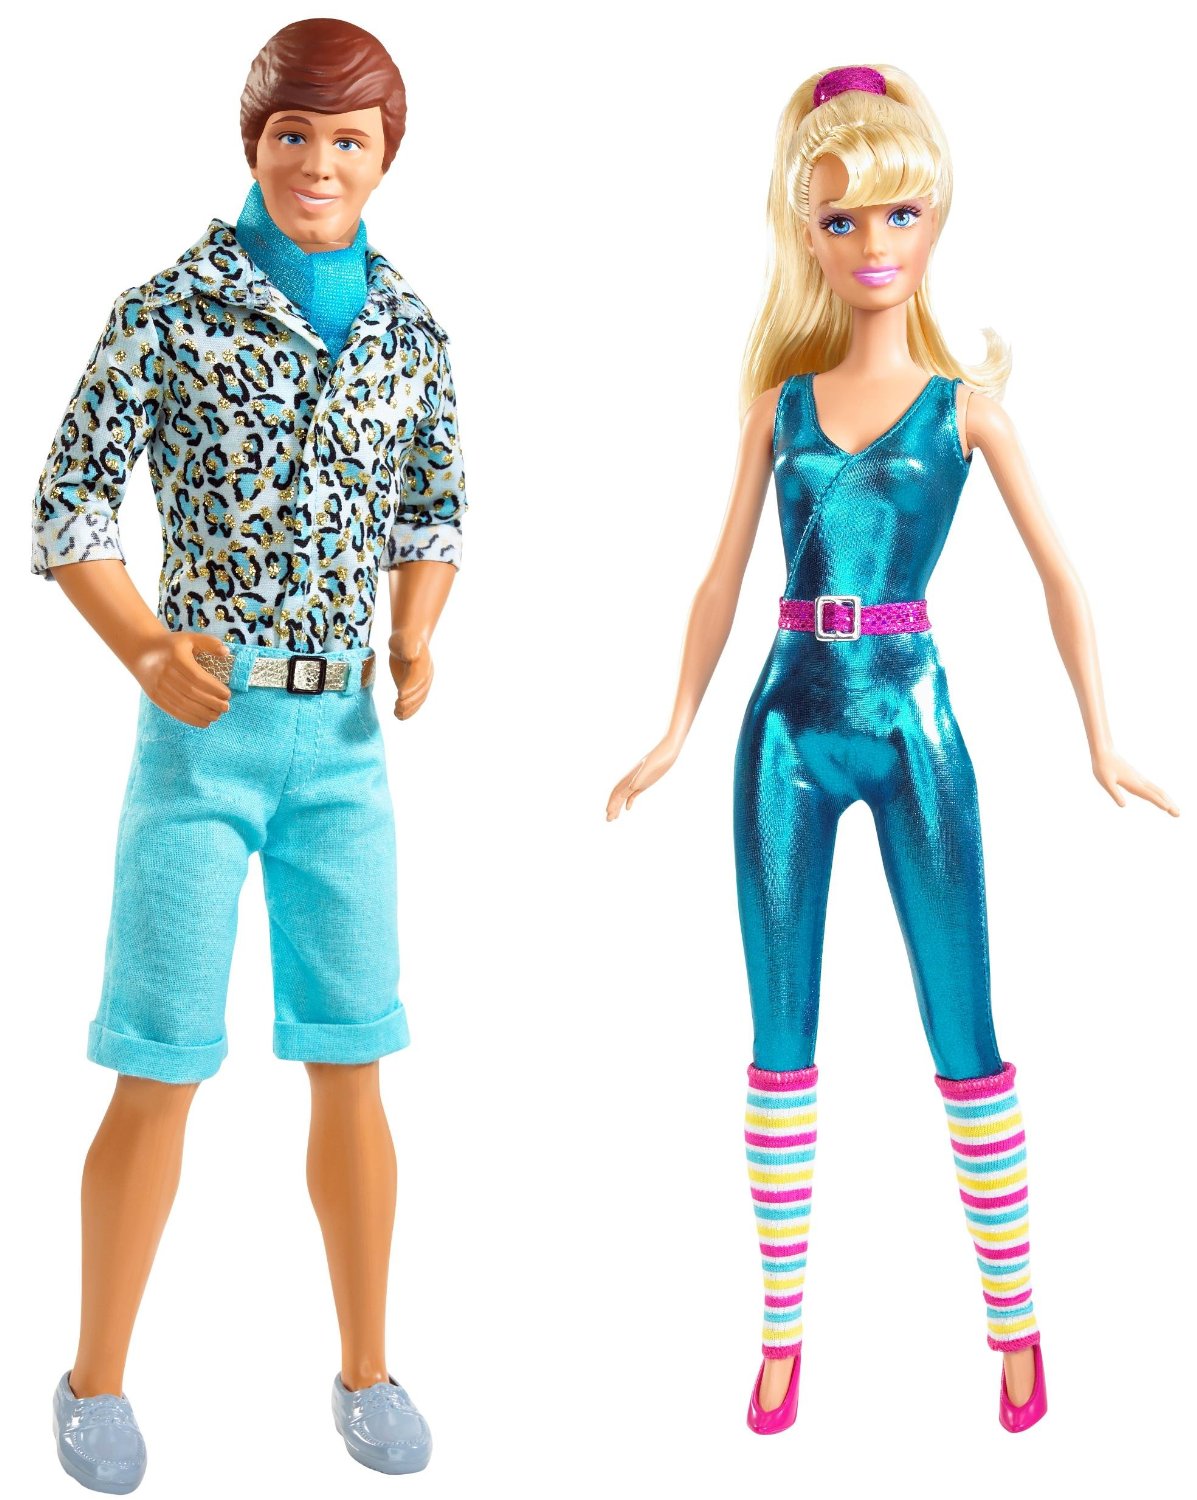 Toy Story Barbie And Ken wallpapers.